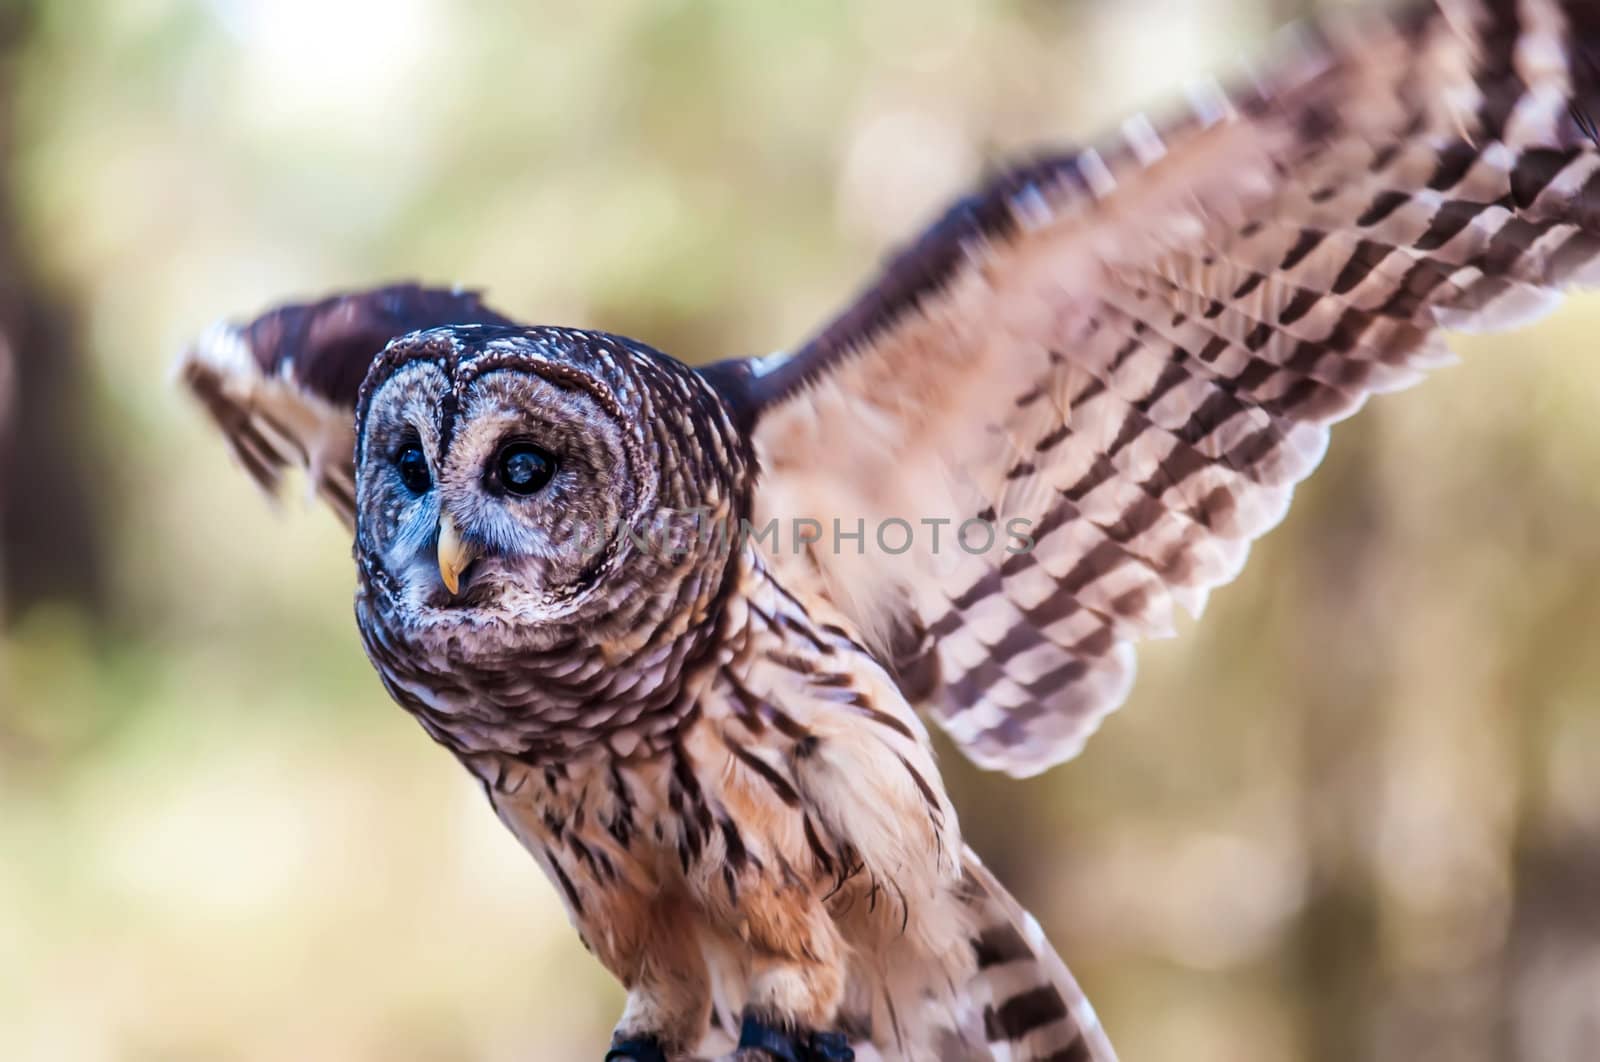 Owls are the order Strigiformes, constituting 200 extant bird of prey species. Most are solitary and nocturnal